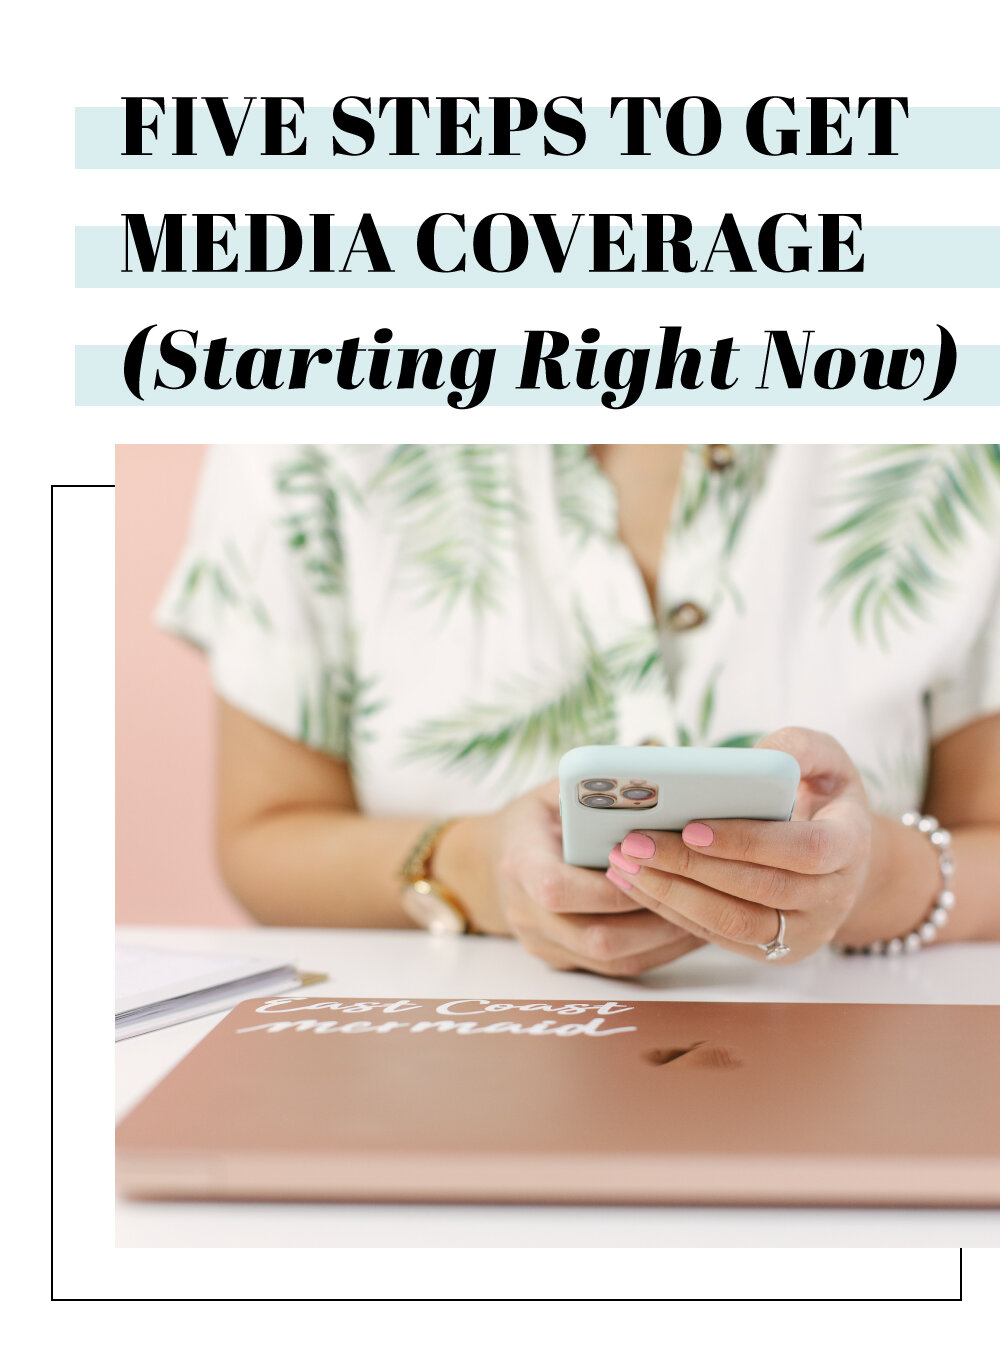 Your Official 5-Step Approach to Getting Media Coverage